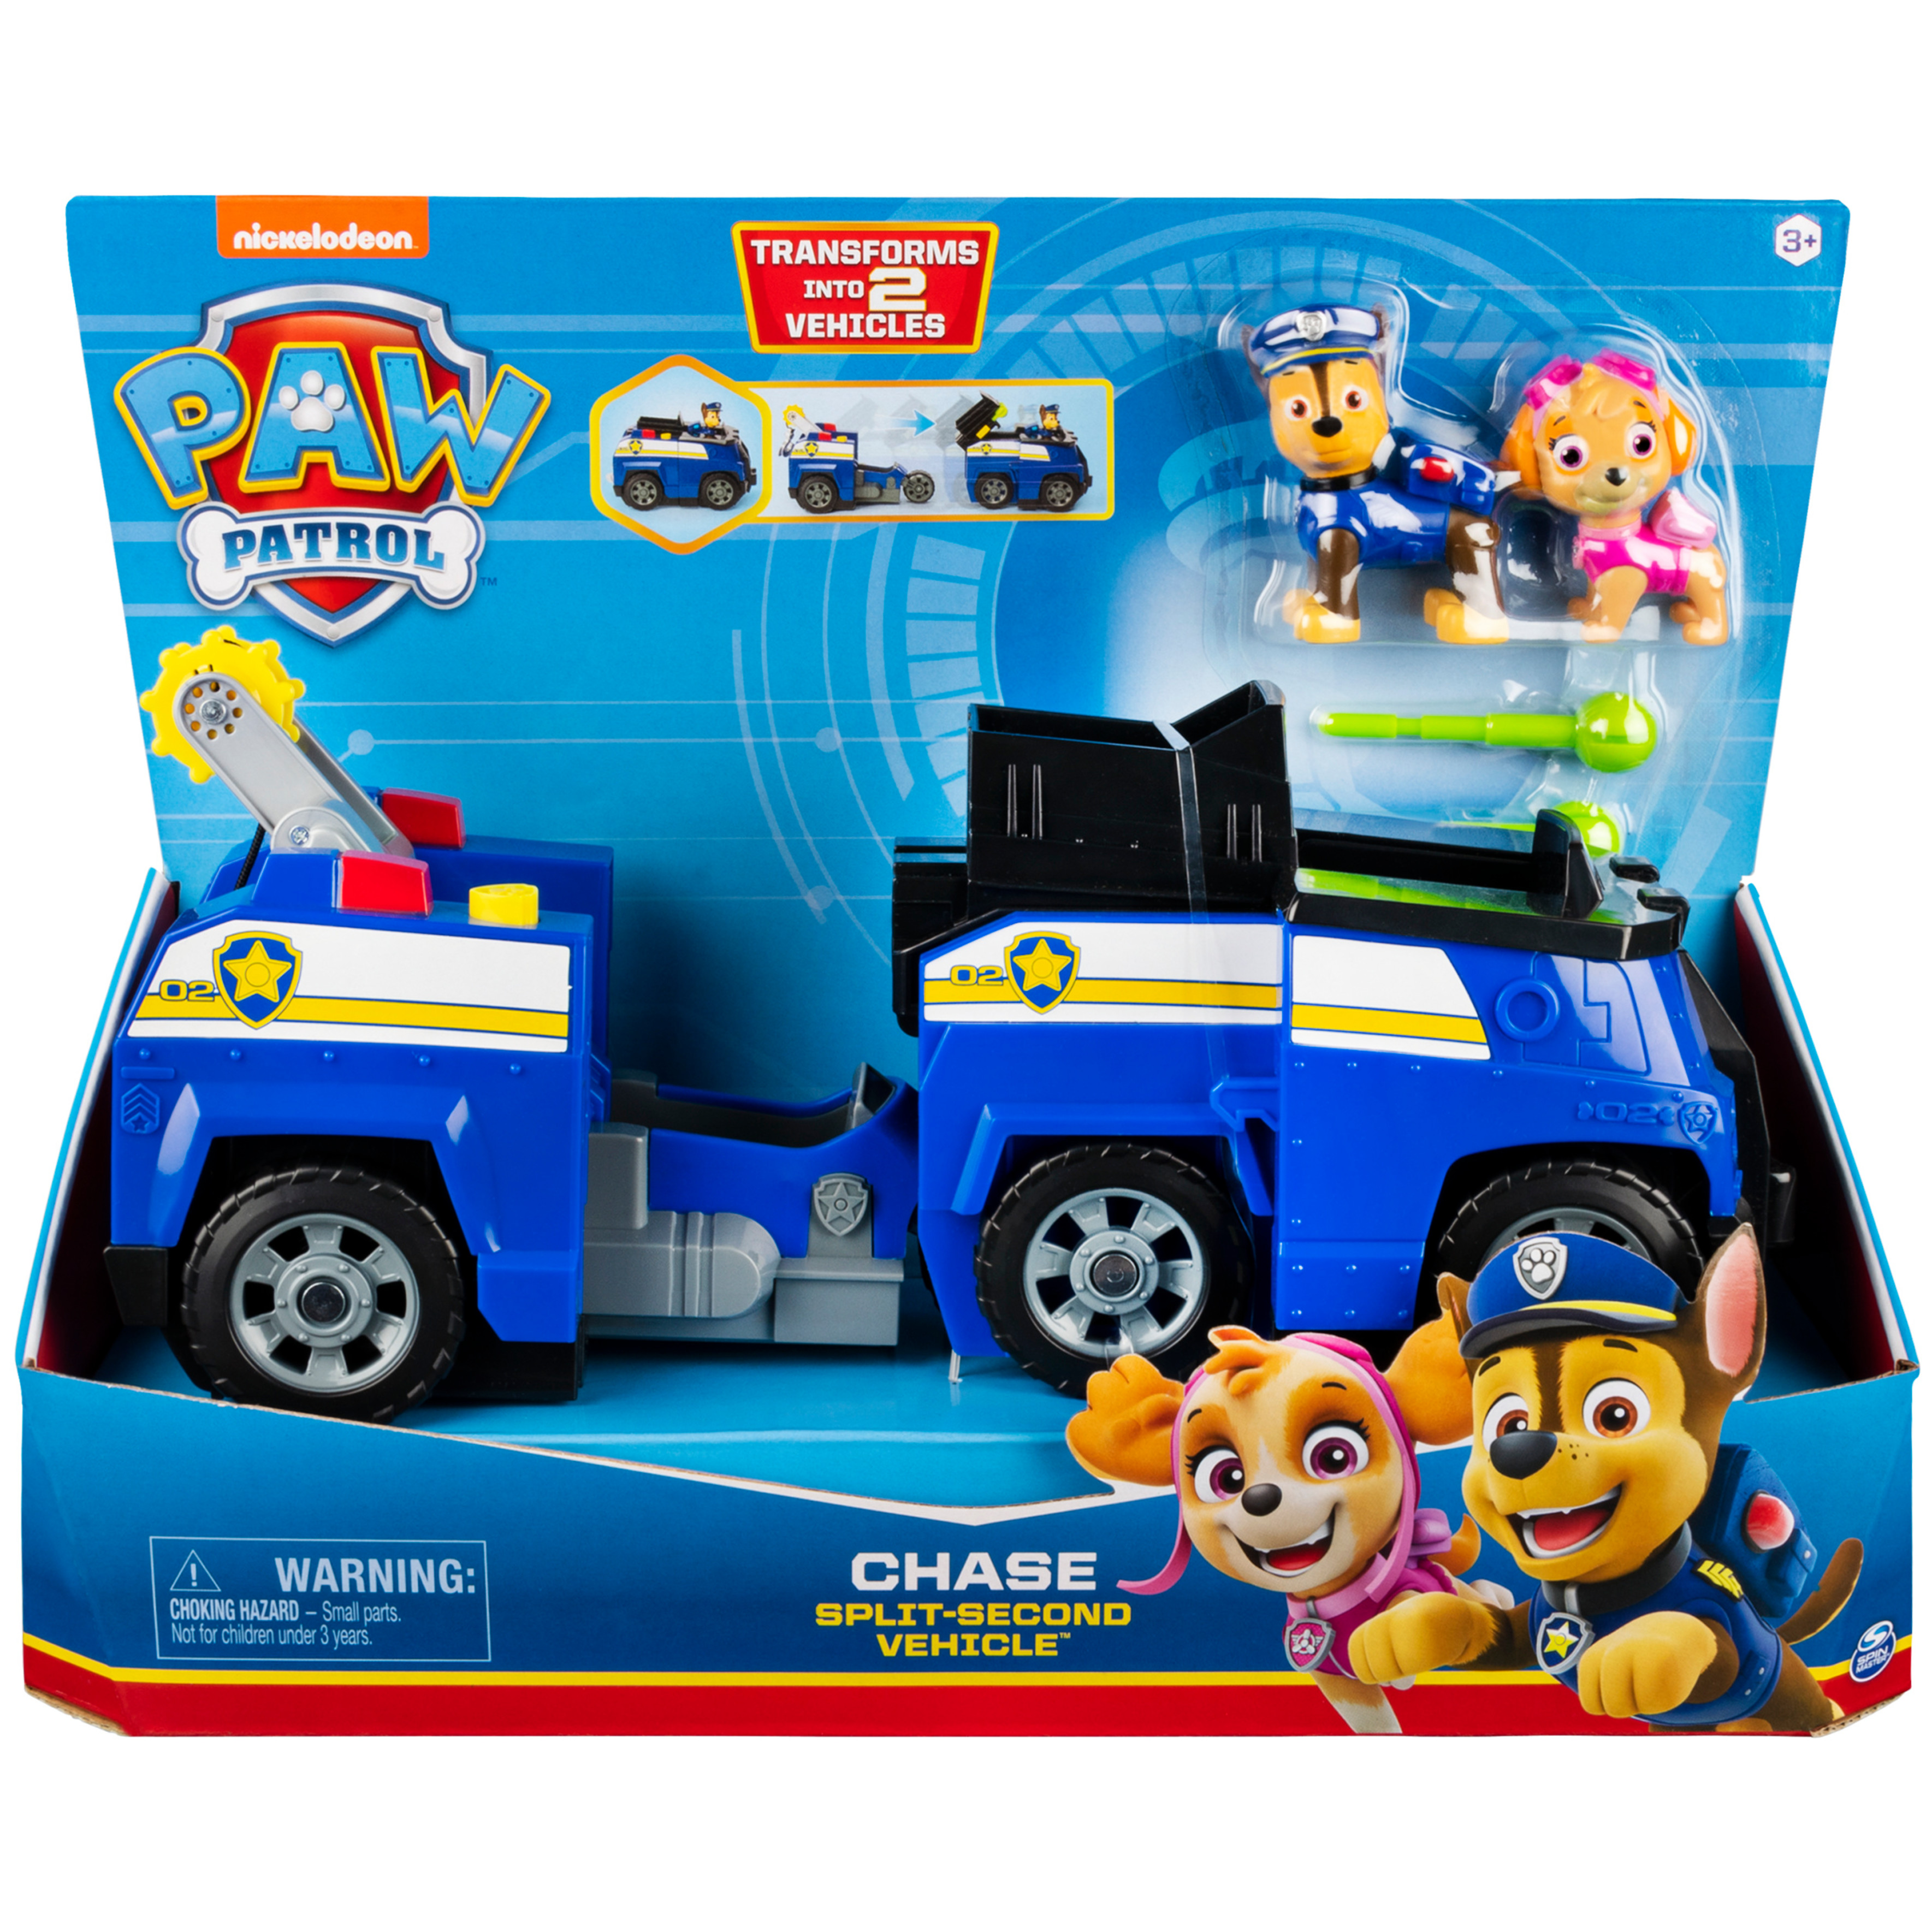 PAW Patrol, Chase Split-Second 2-in-1 Transforming Vehicle with Figure - image 2 of 8